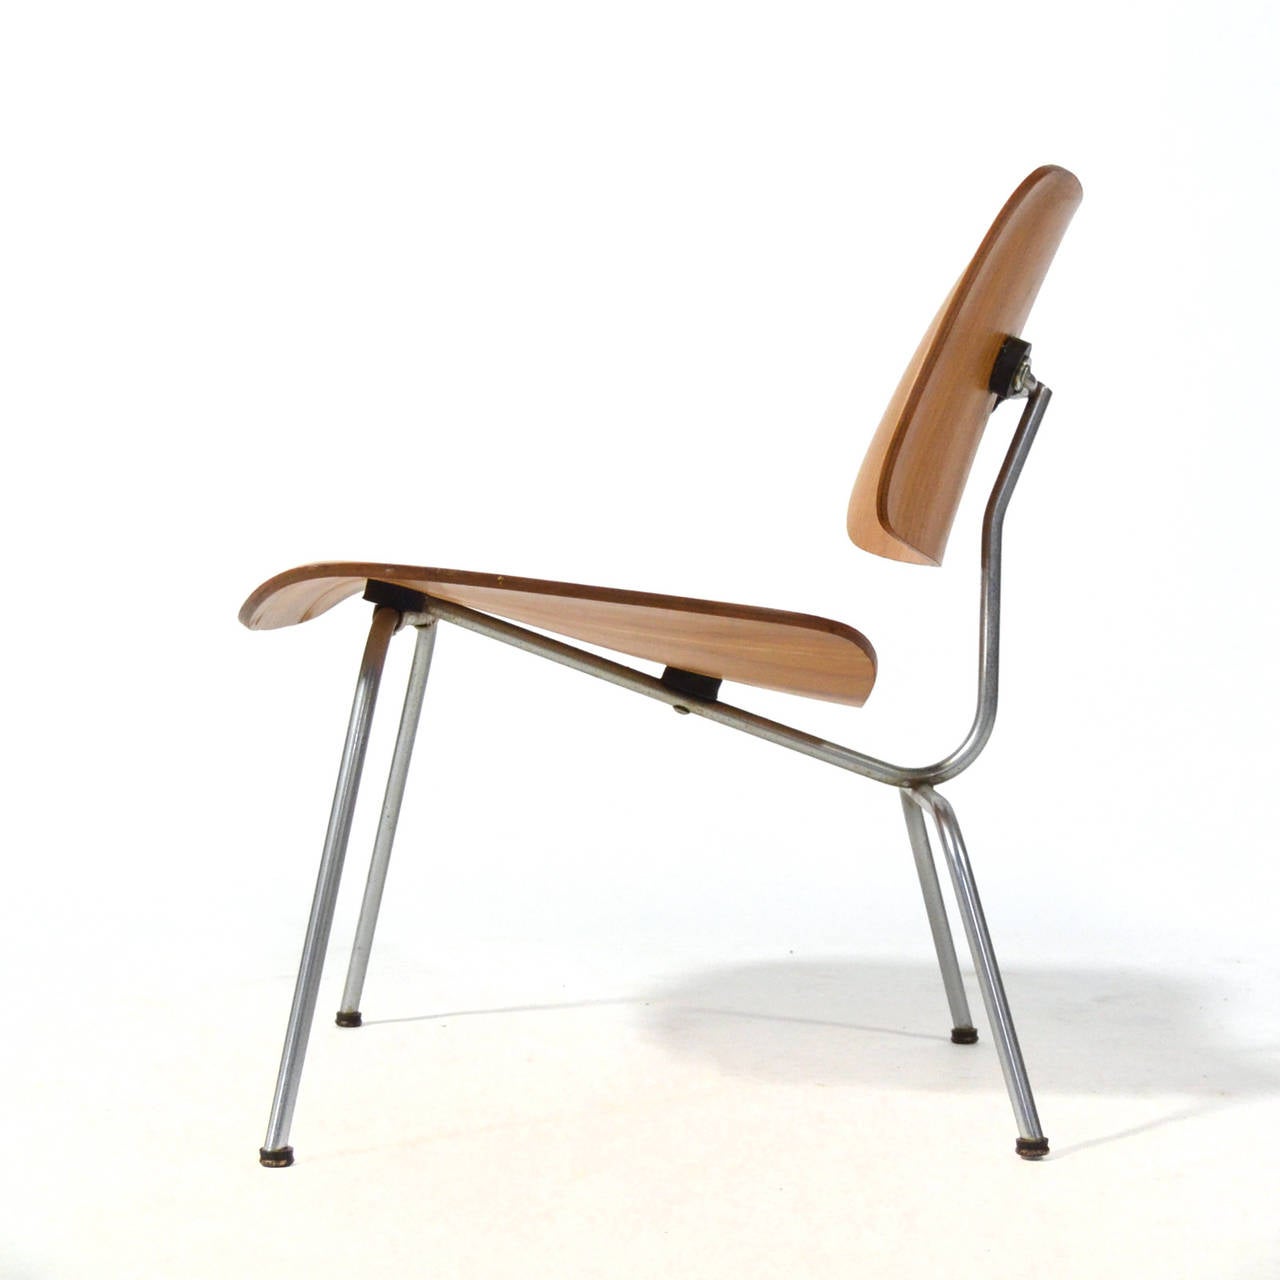 Mid-Century Modern Eames LCM Lounge Chair by Herman Miller with Developmental Mounts